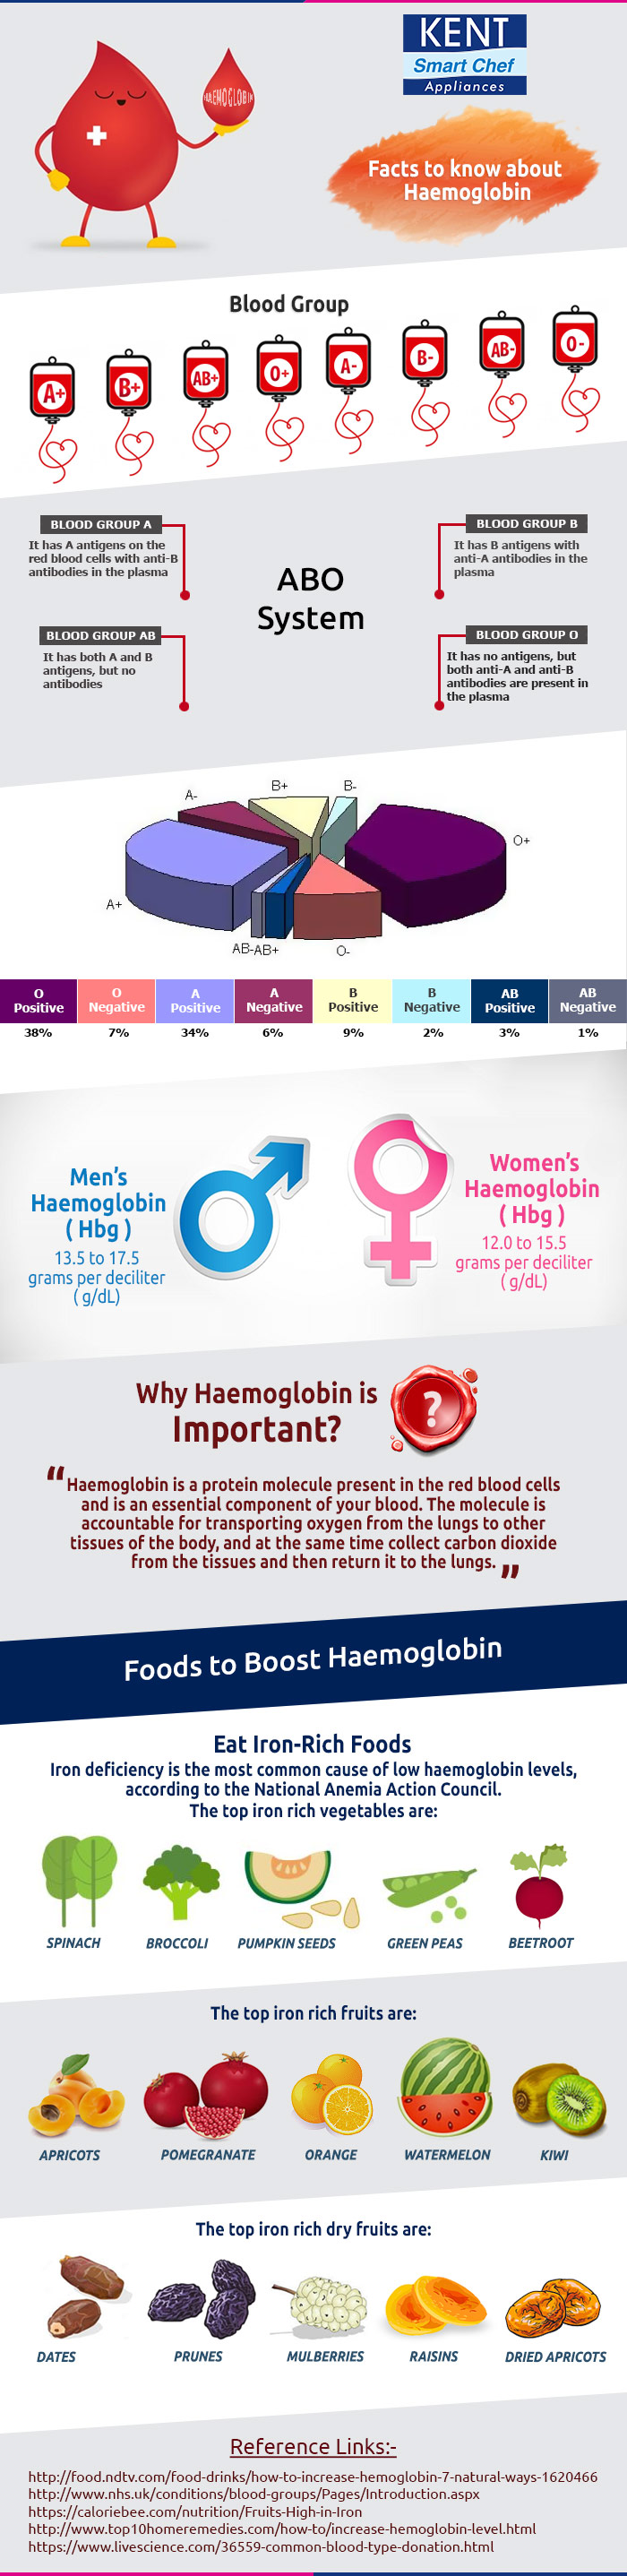 Facts About Haemoglobin